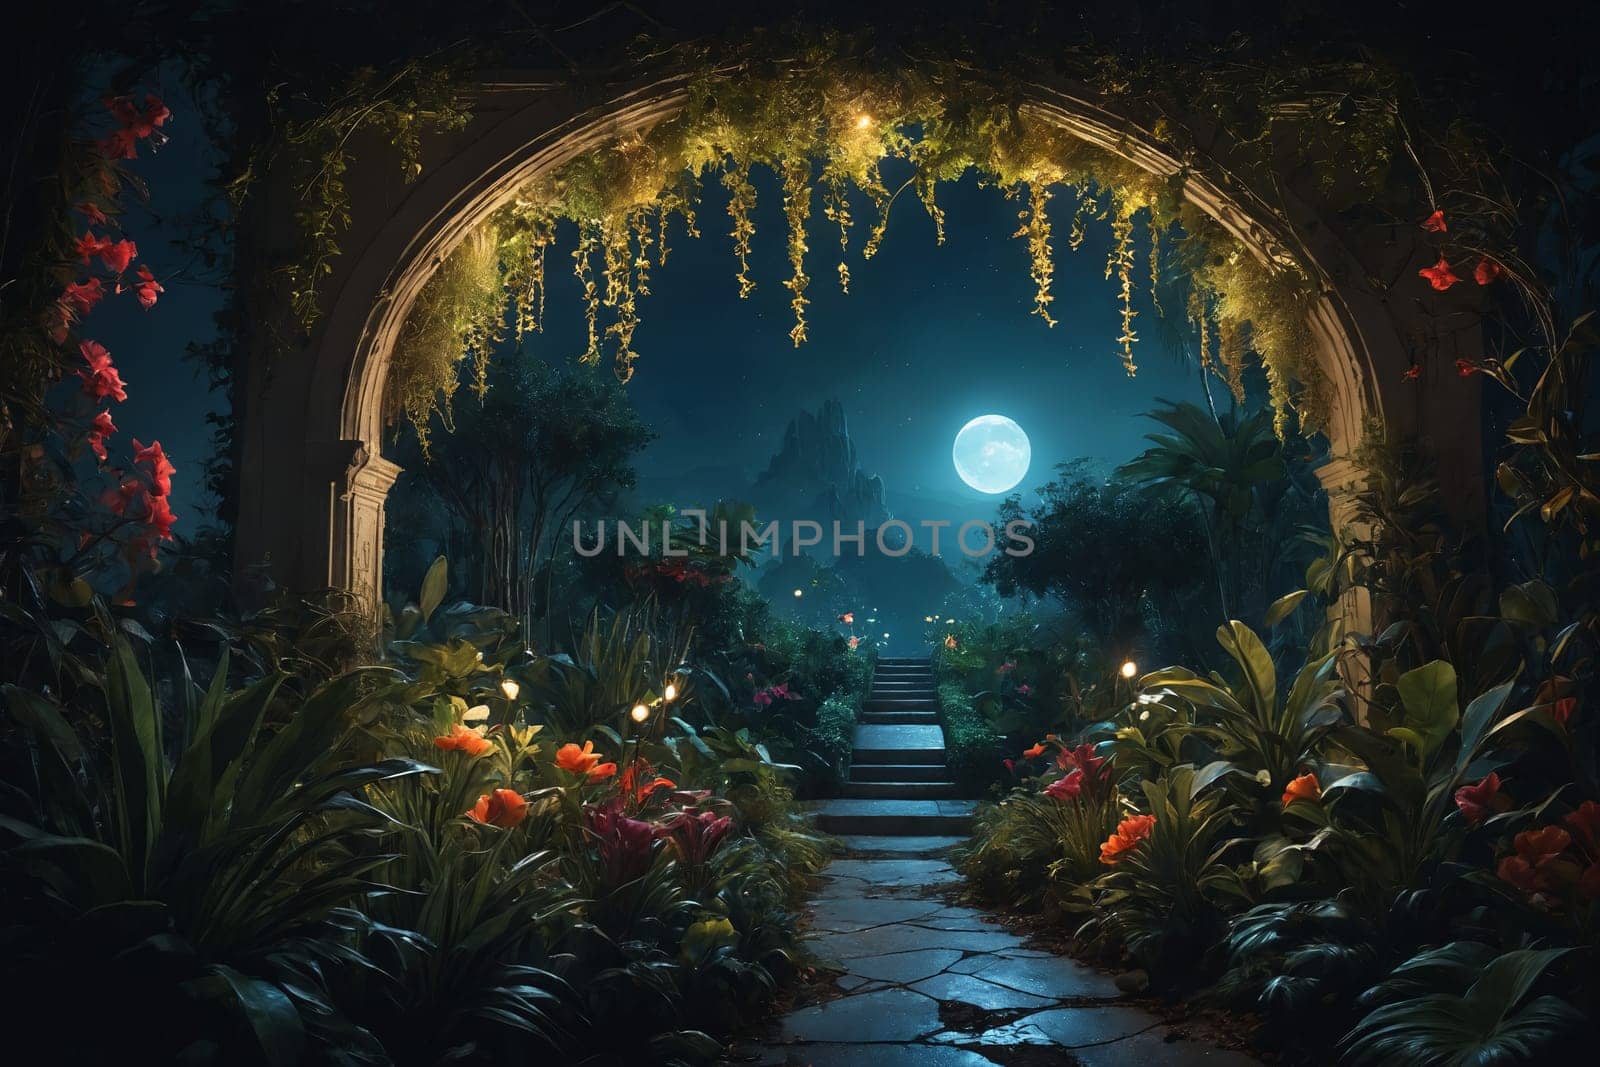 This picturesque image shows a lush tropical forest under a glowing moon, where variety of flora is highlighted. A stone path, lighted by small lamps, guides through the greenery.